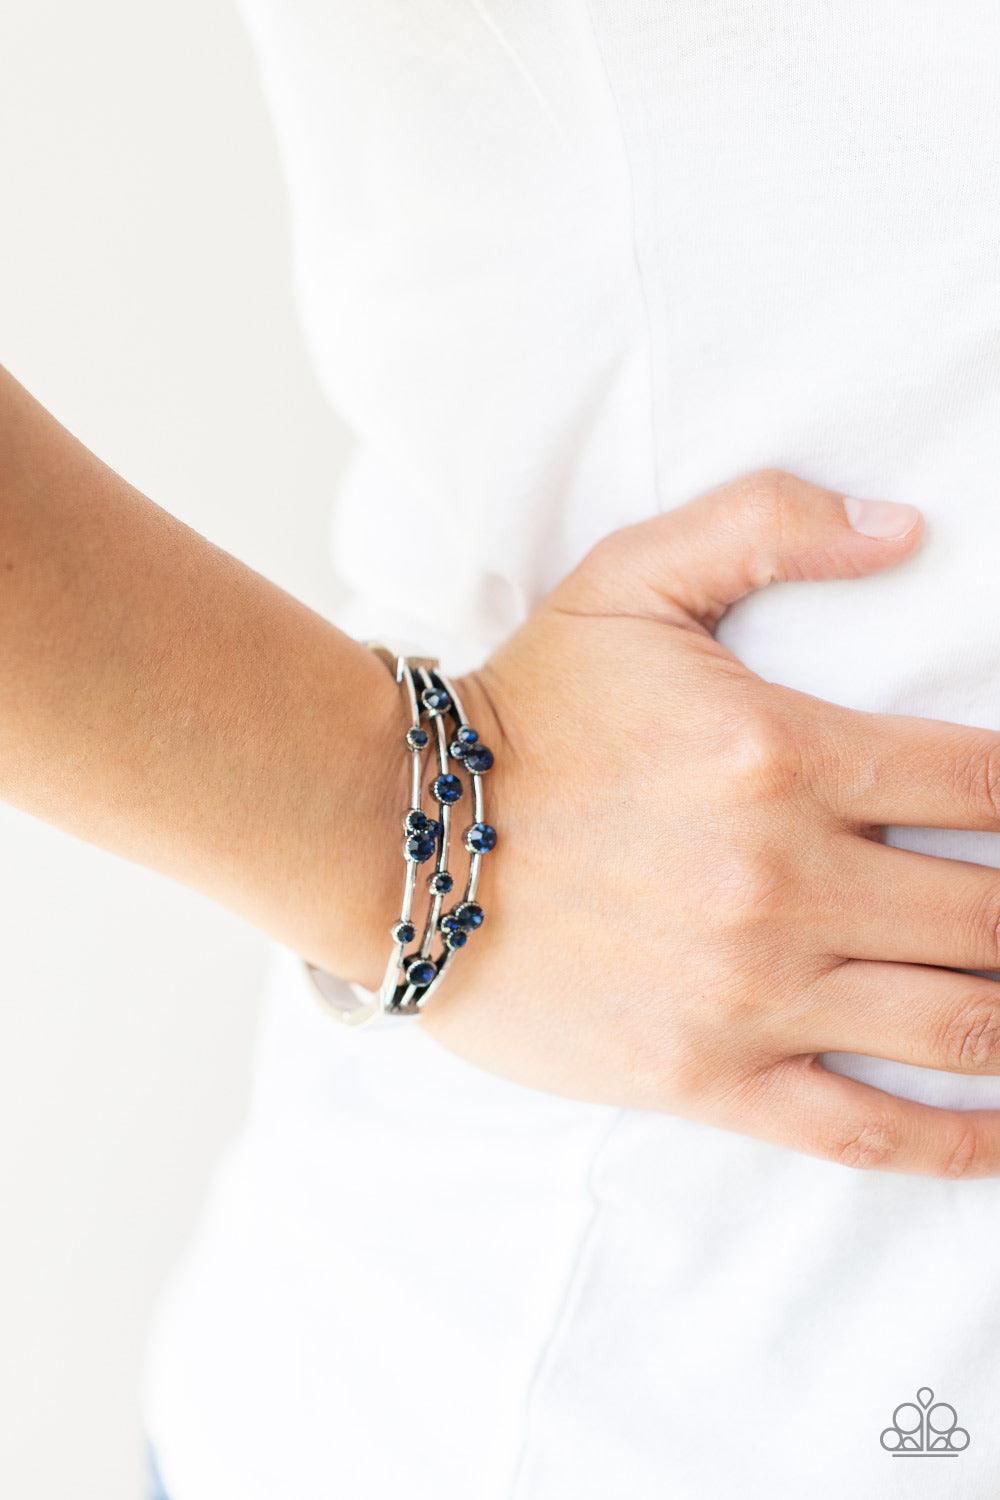 Paparazzi Accessories Cosmic Candescence - Blue A smattering of glittery blue rhinestones adorn three silver bars that coalesce into a versatile silver cuff-like bangle around the wrist. Features a hinged closure. Sold as one individual bracelet. Jewelry